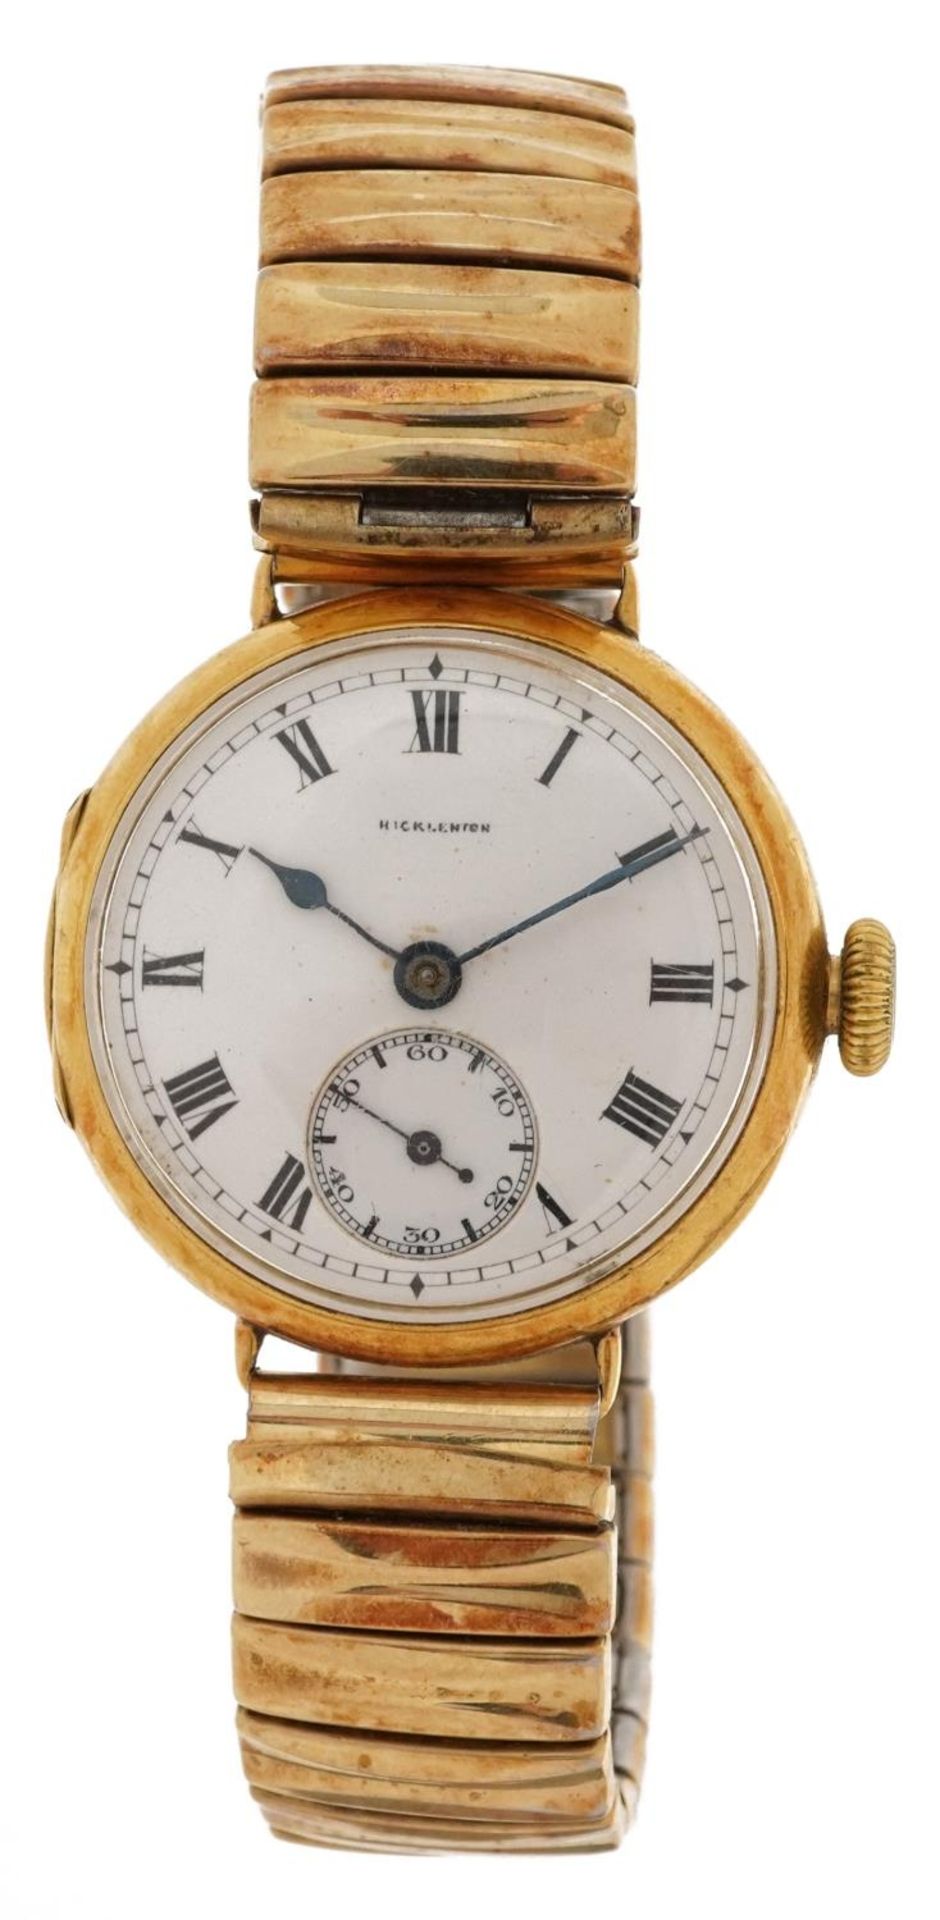 18ct gold gentlemen's manual trench type wristwatch with subsidiary dial retailed by Hicklenton, - Image 2 of 6